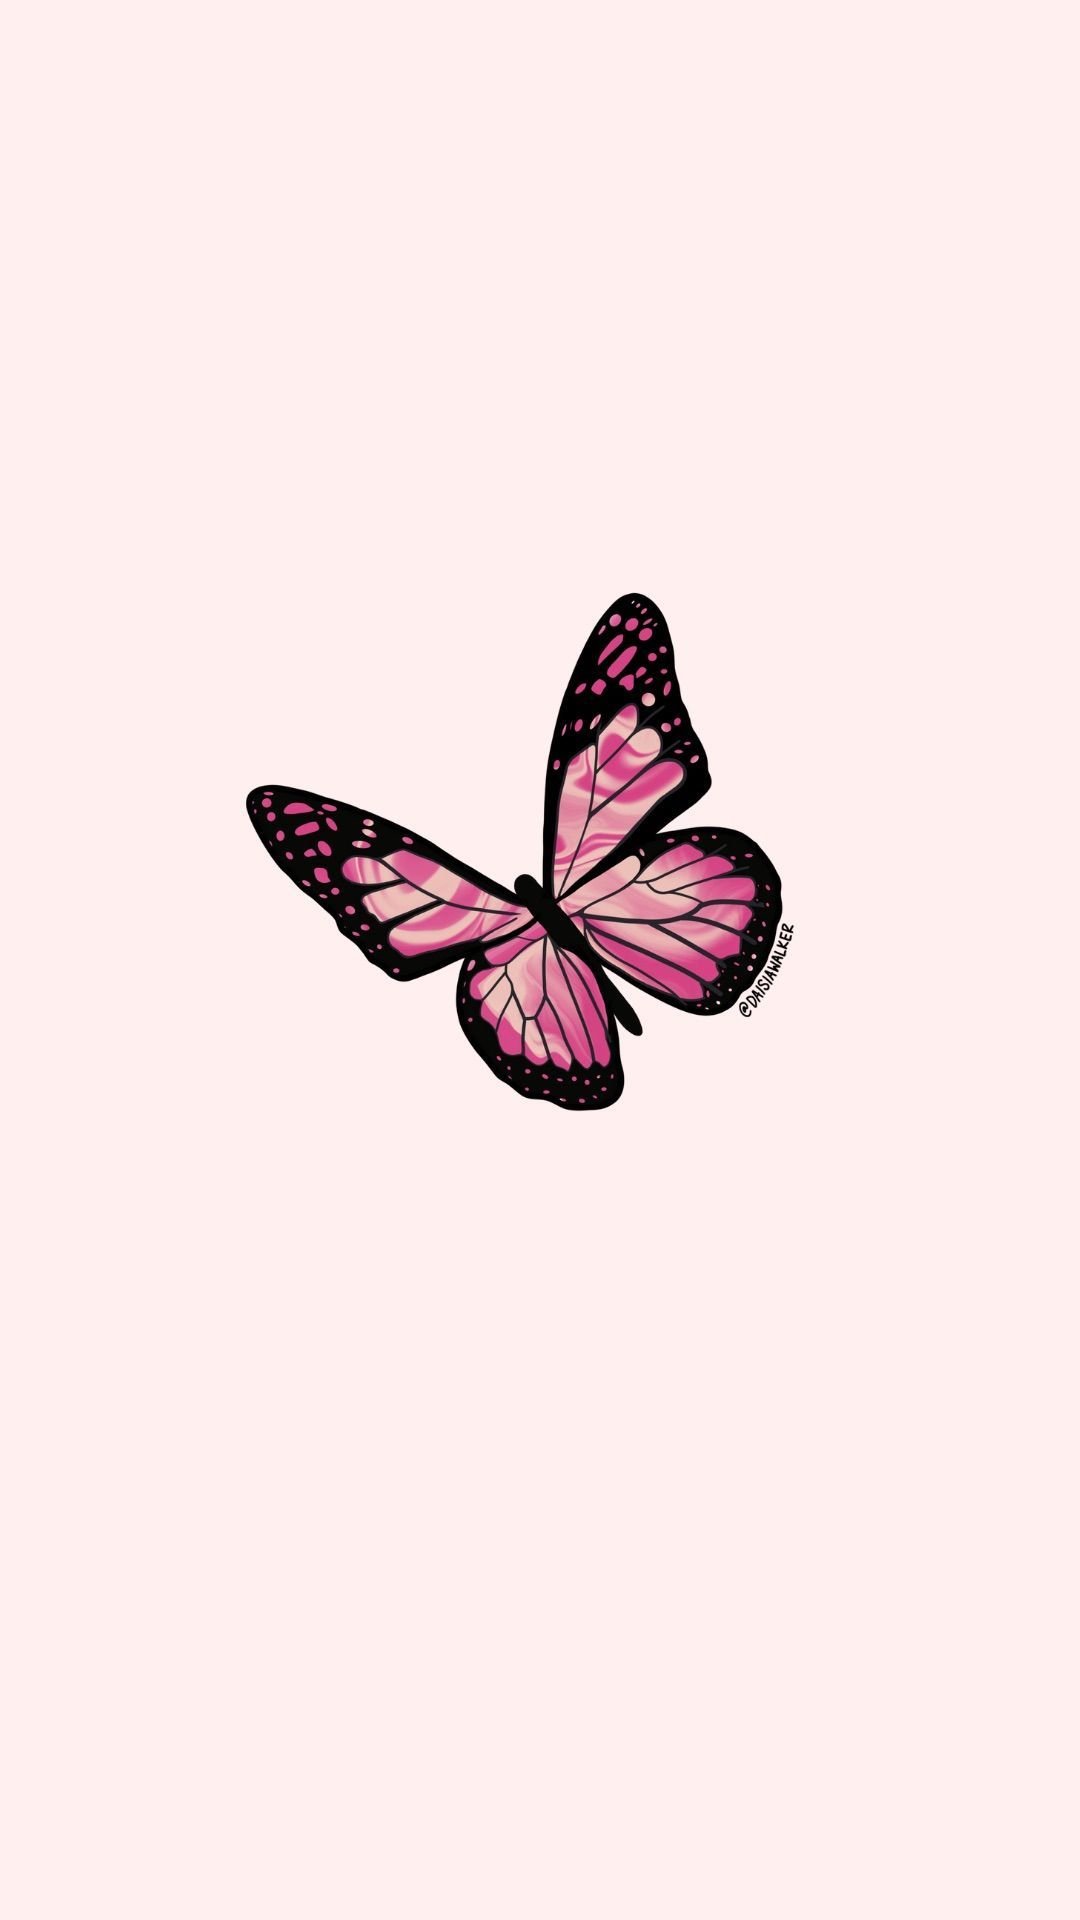 Aesthetic butterfly wallpaper for phone background. - Profile picture